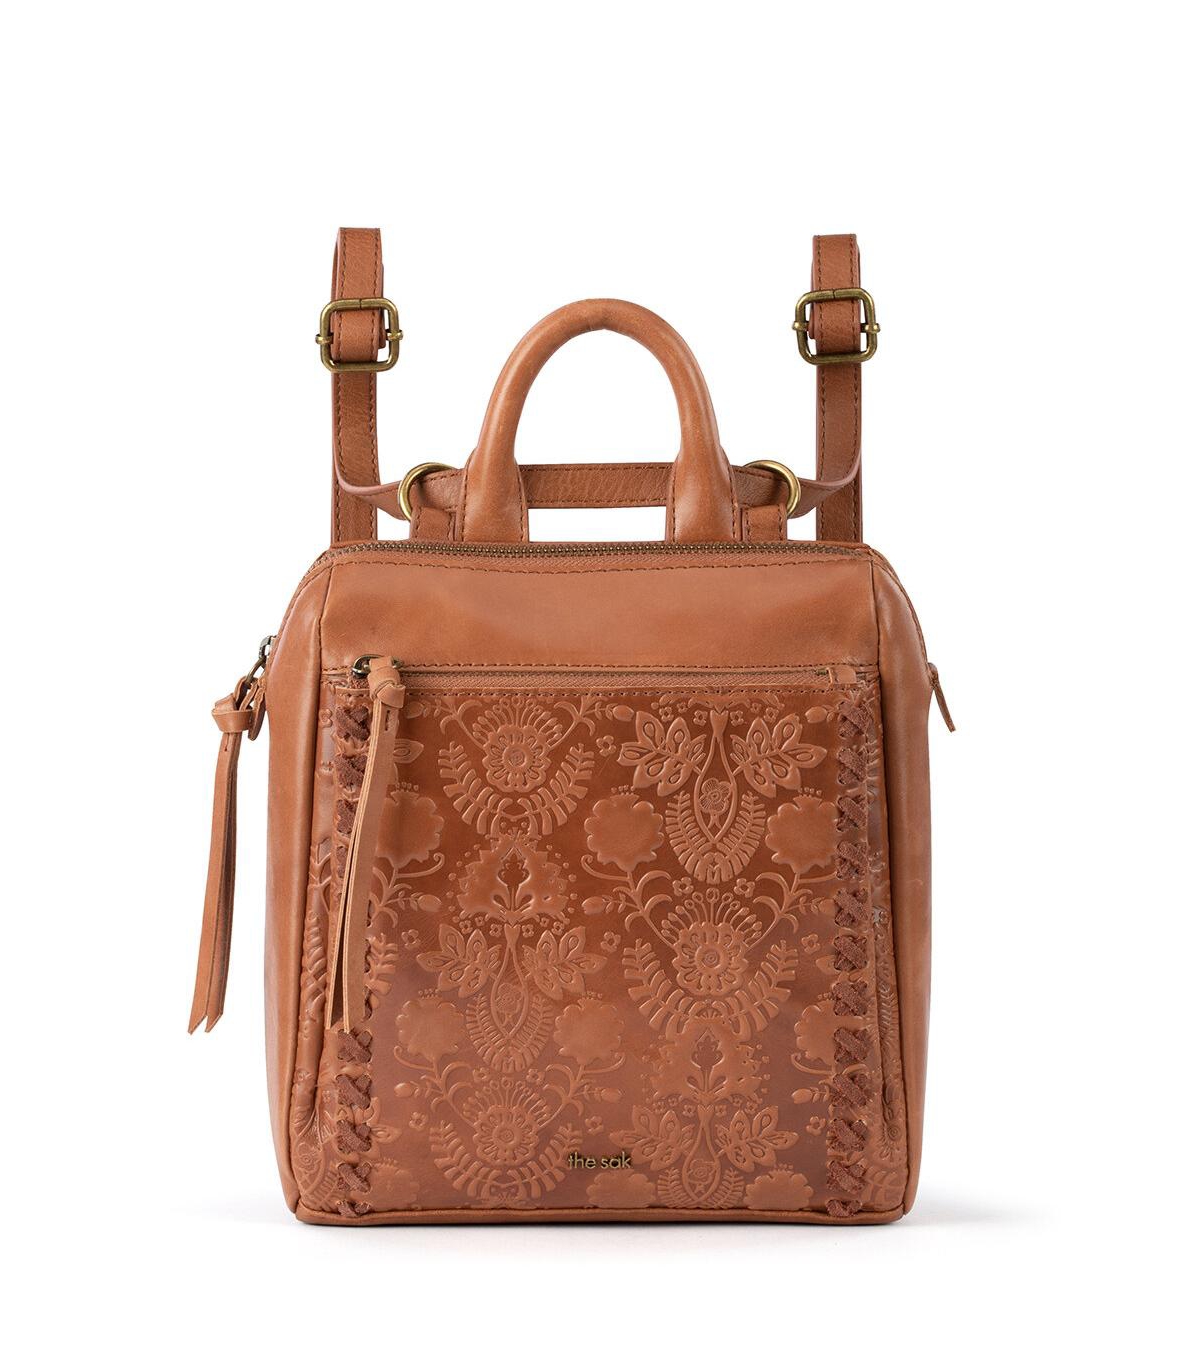 Loyola Convertible Small Leather Backpack - Tobacco Floral Embossed